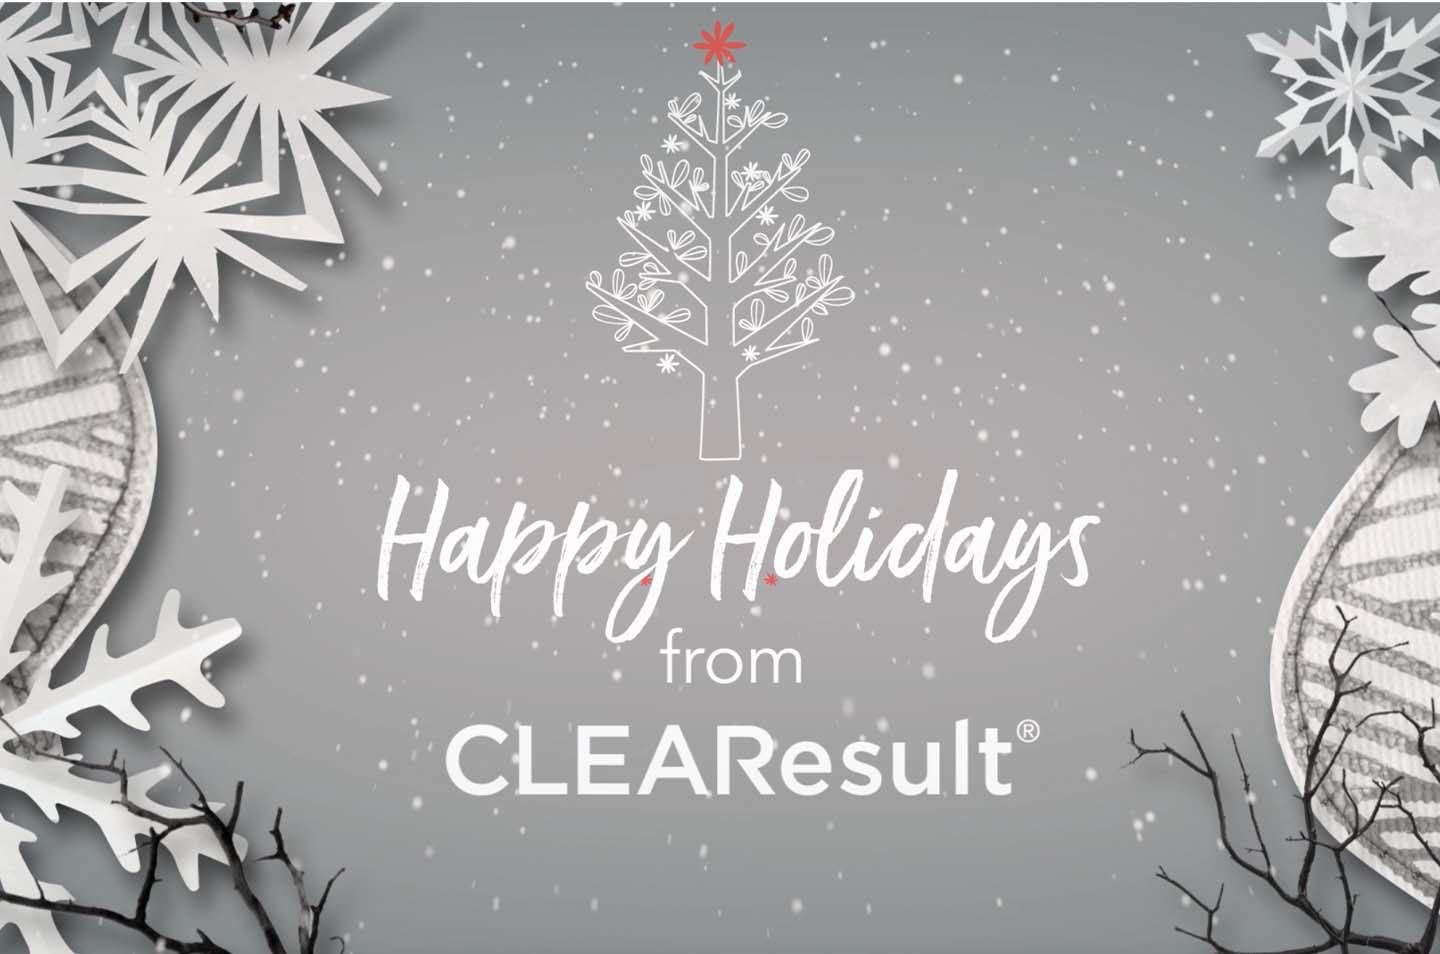 Happy Holidays from CLEAResult!